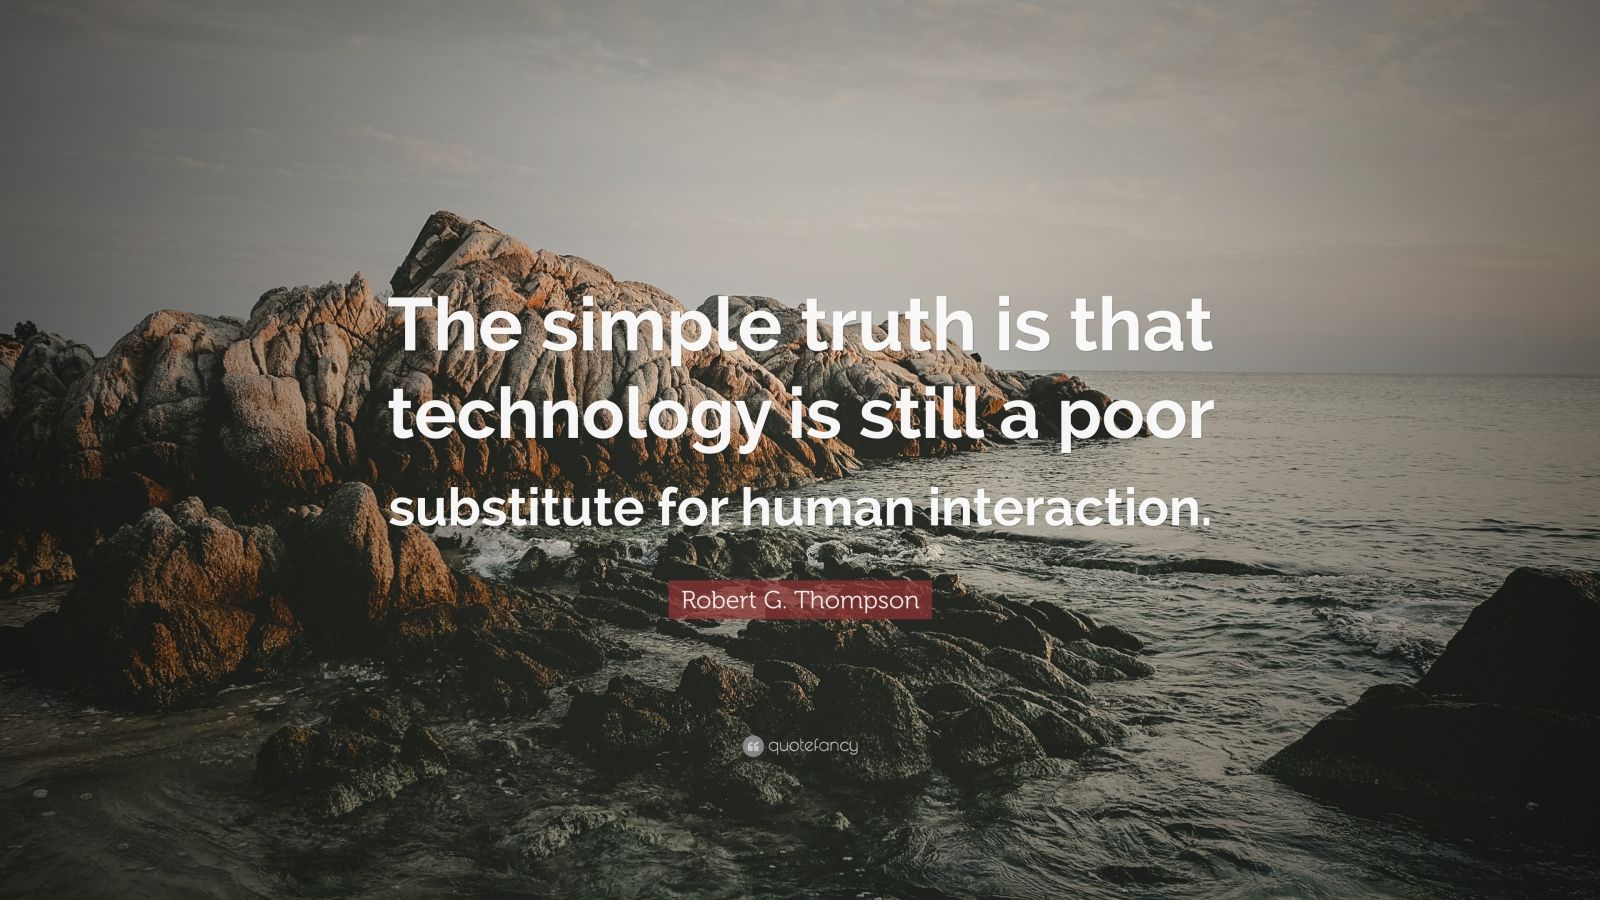 Robert G. Thompson Quote “The simple truth is that